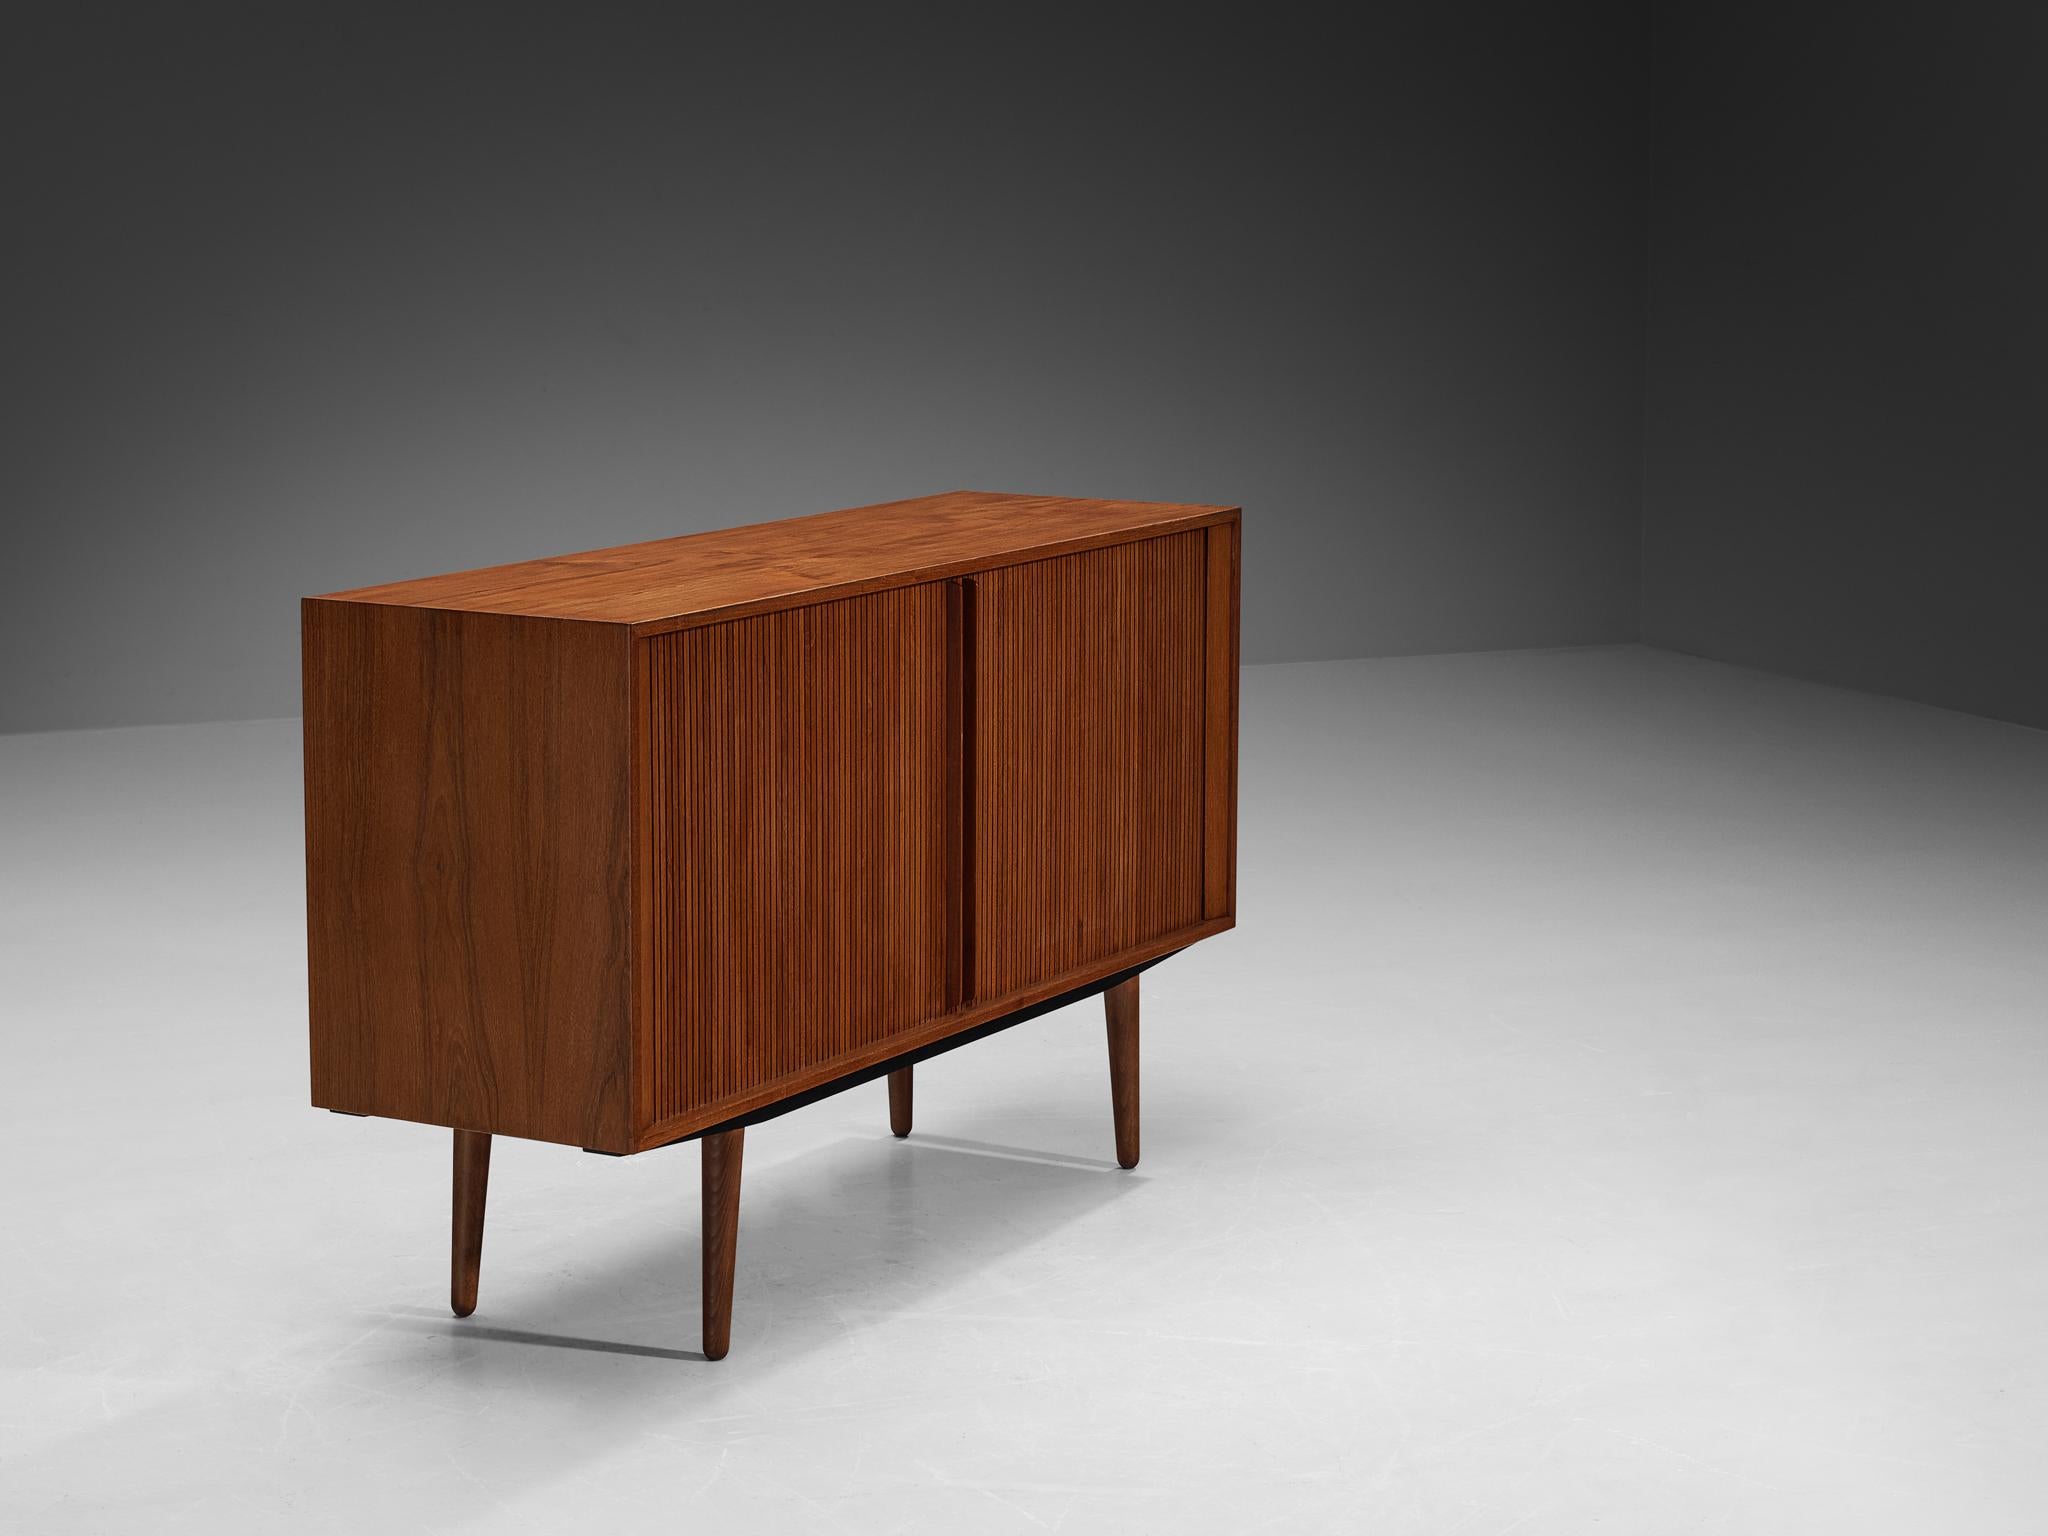 Cabinet, teak, birch, felt, Denmark, 1950s

This sideboard is exemplary for refined, highly detailed and very well-made furniture. The front corpus is furnished with tambour door panels that easily move sideways. The extended doorhandles and beveled